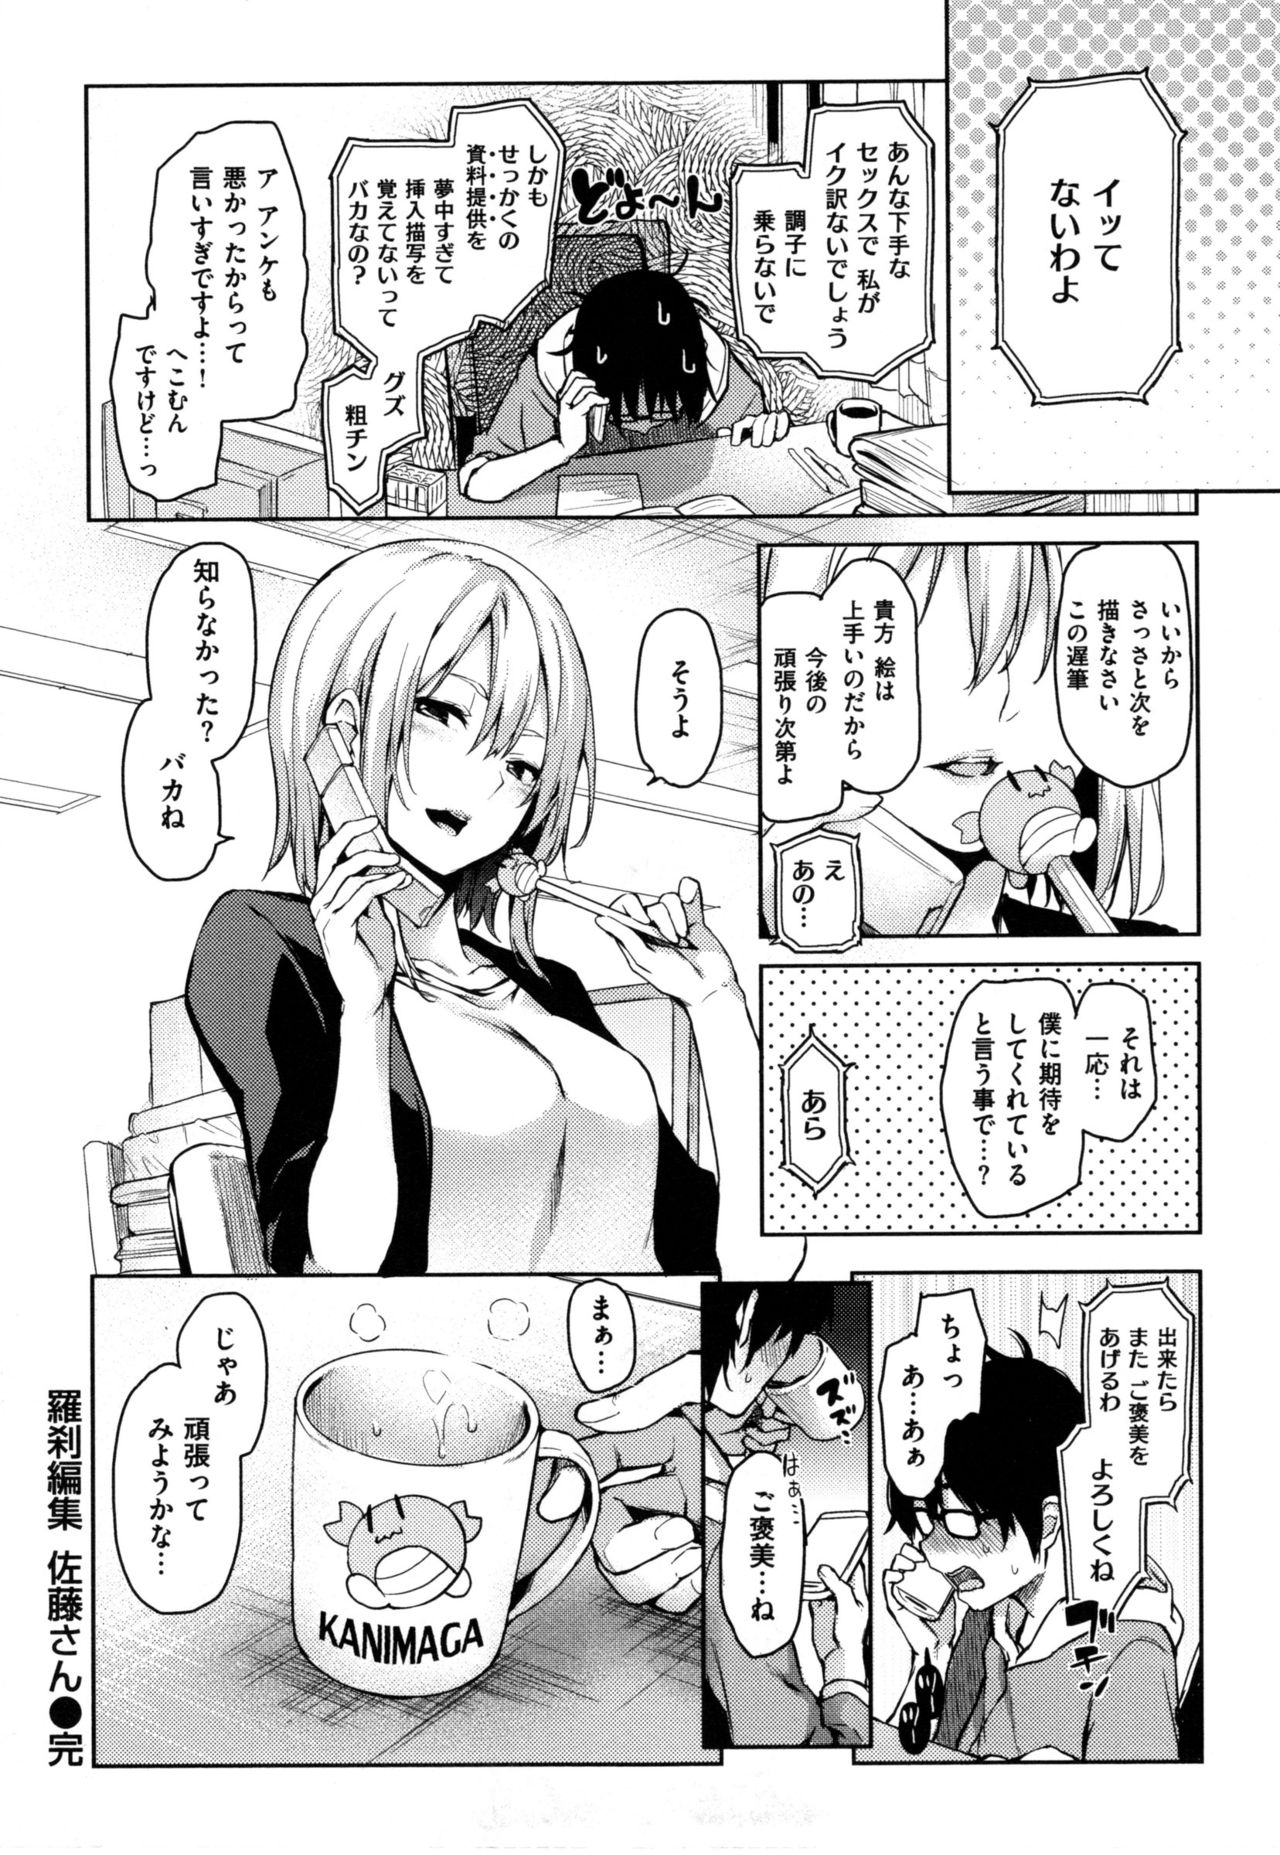 [Michiking] Shujuu Ecstasy - Sexual Relation of Master and Servant.  - page 47 full